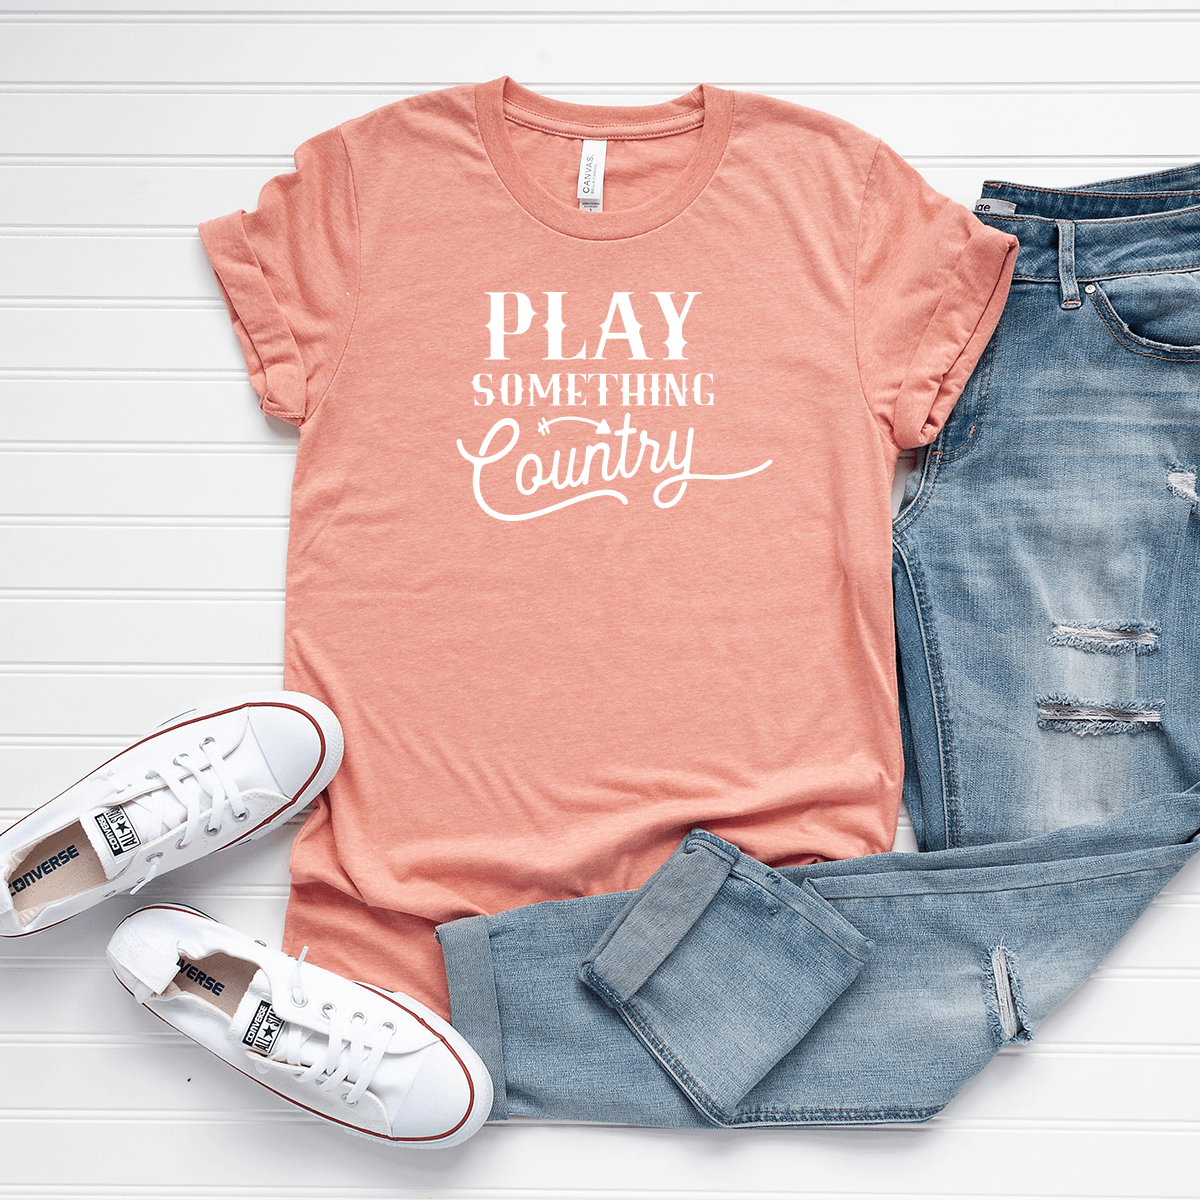 Play Something Country - Bella+Canvas Tee